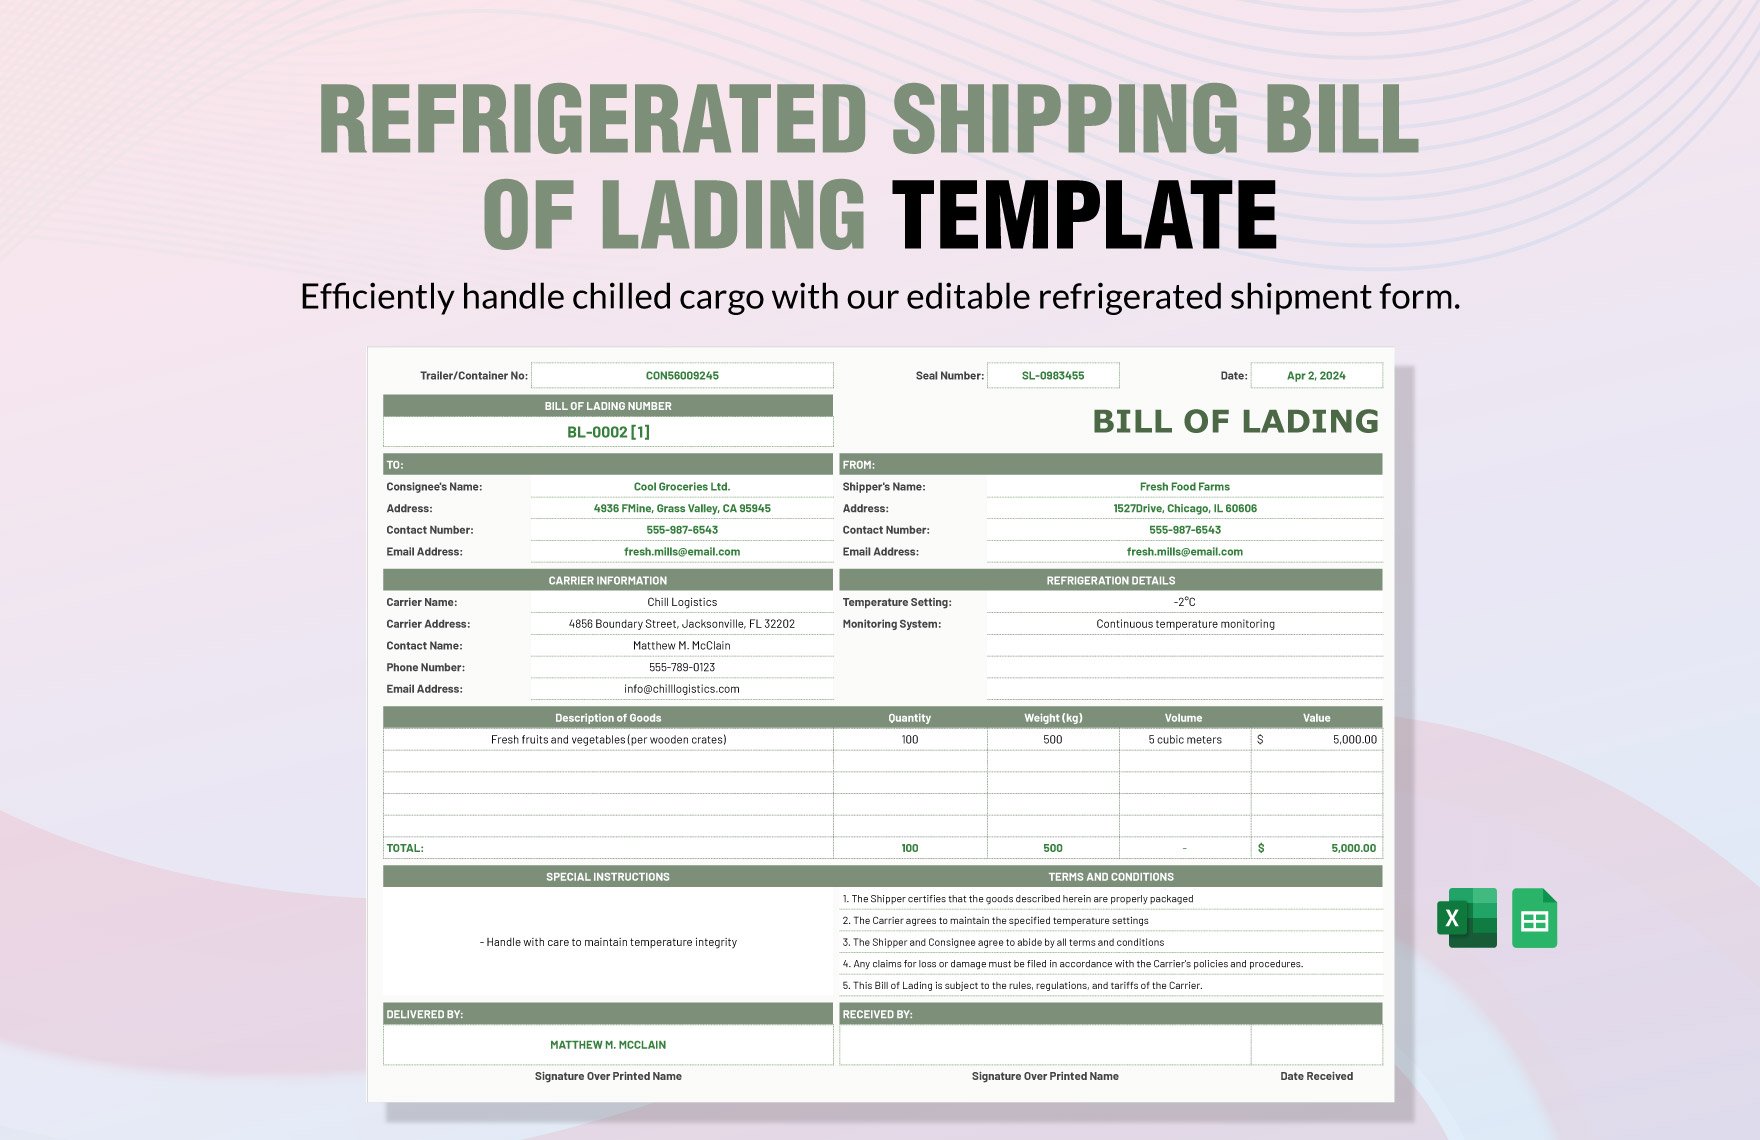 Refrigerated Shipping Bill of Lading Template in Excel, Google Sheets